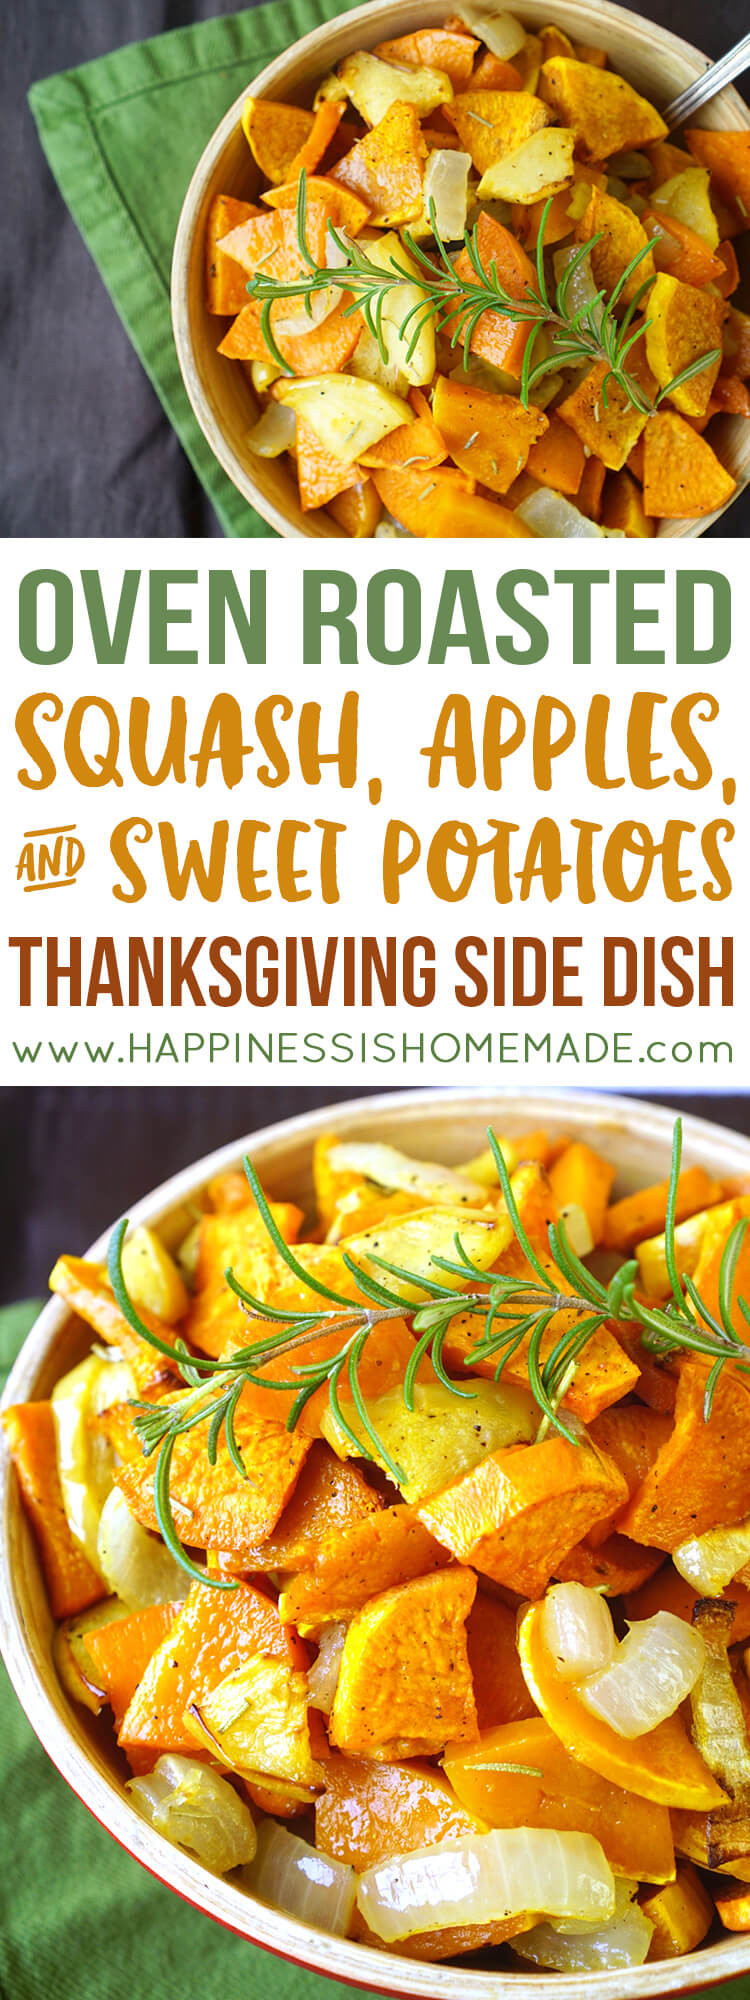 Thanksgiving Sweet Potatoes
 Roasted Sweet Potatoes Squash & Apples Happiness is